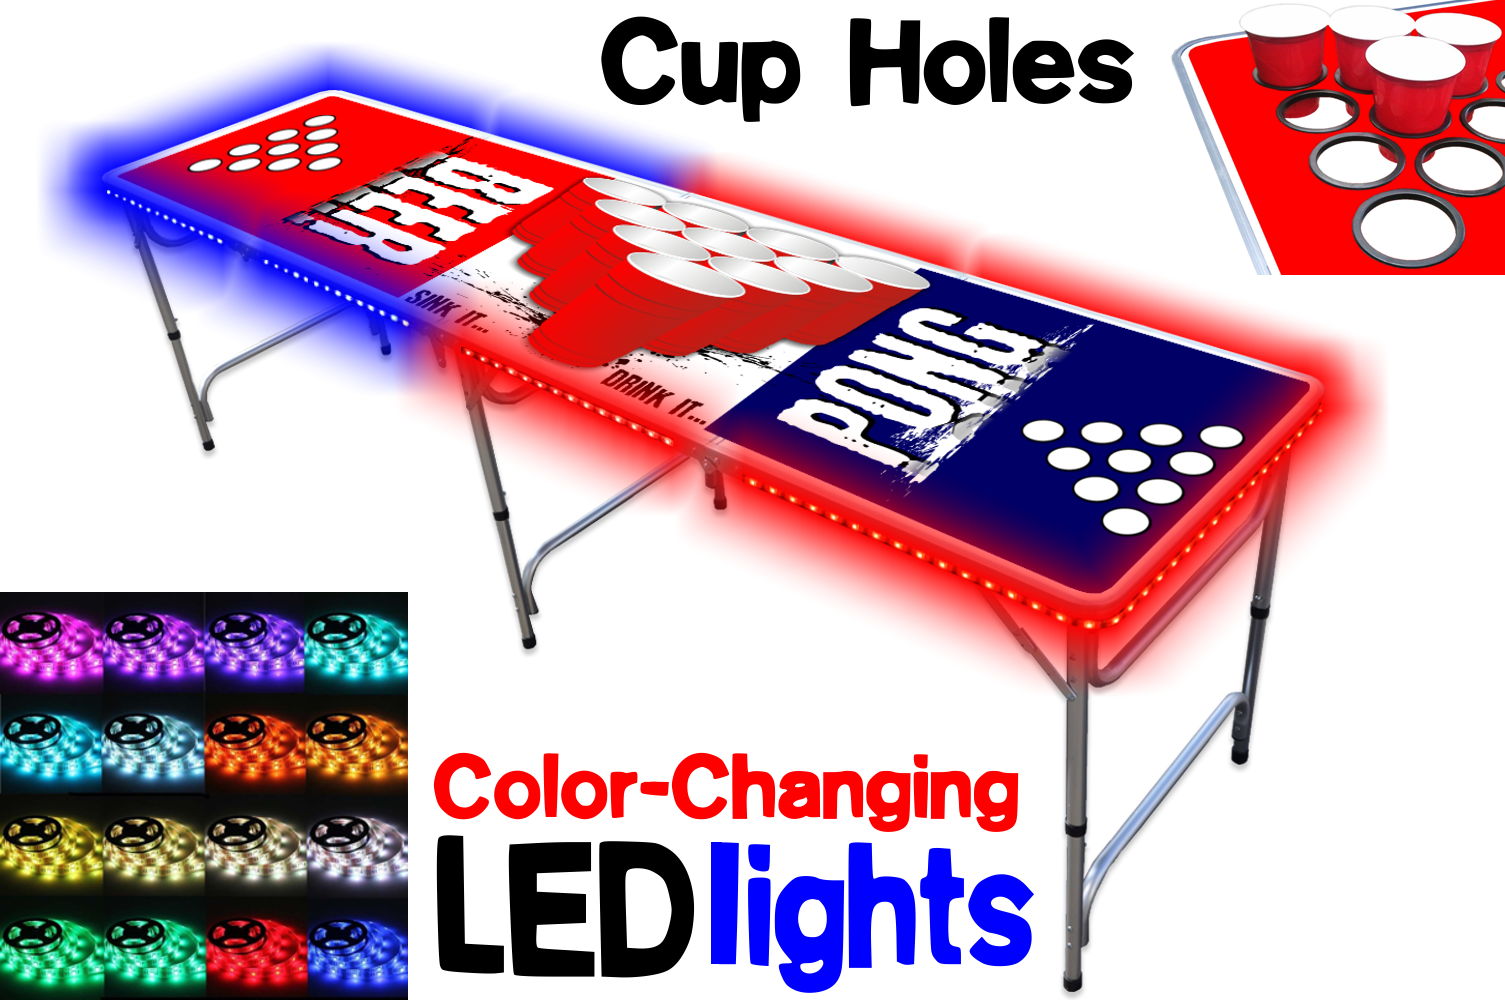 8-Foot Professional Beer Pong Table w/ Cup Holes & LED Glow Lights - Beer Pong Edition